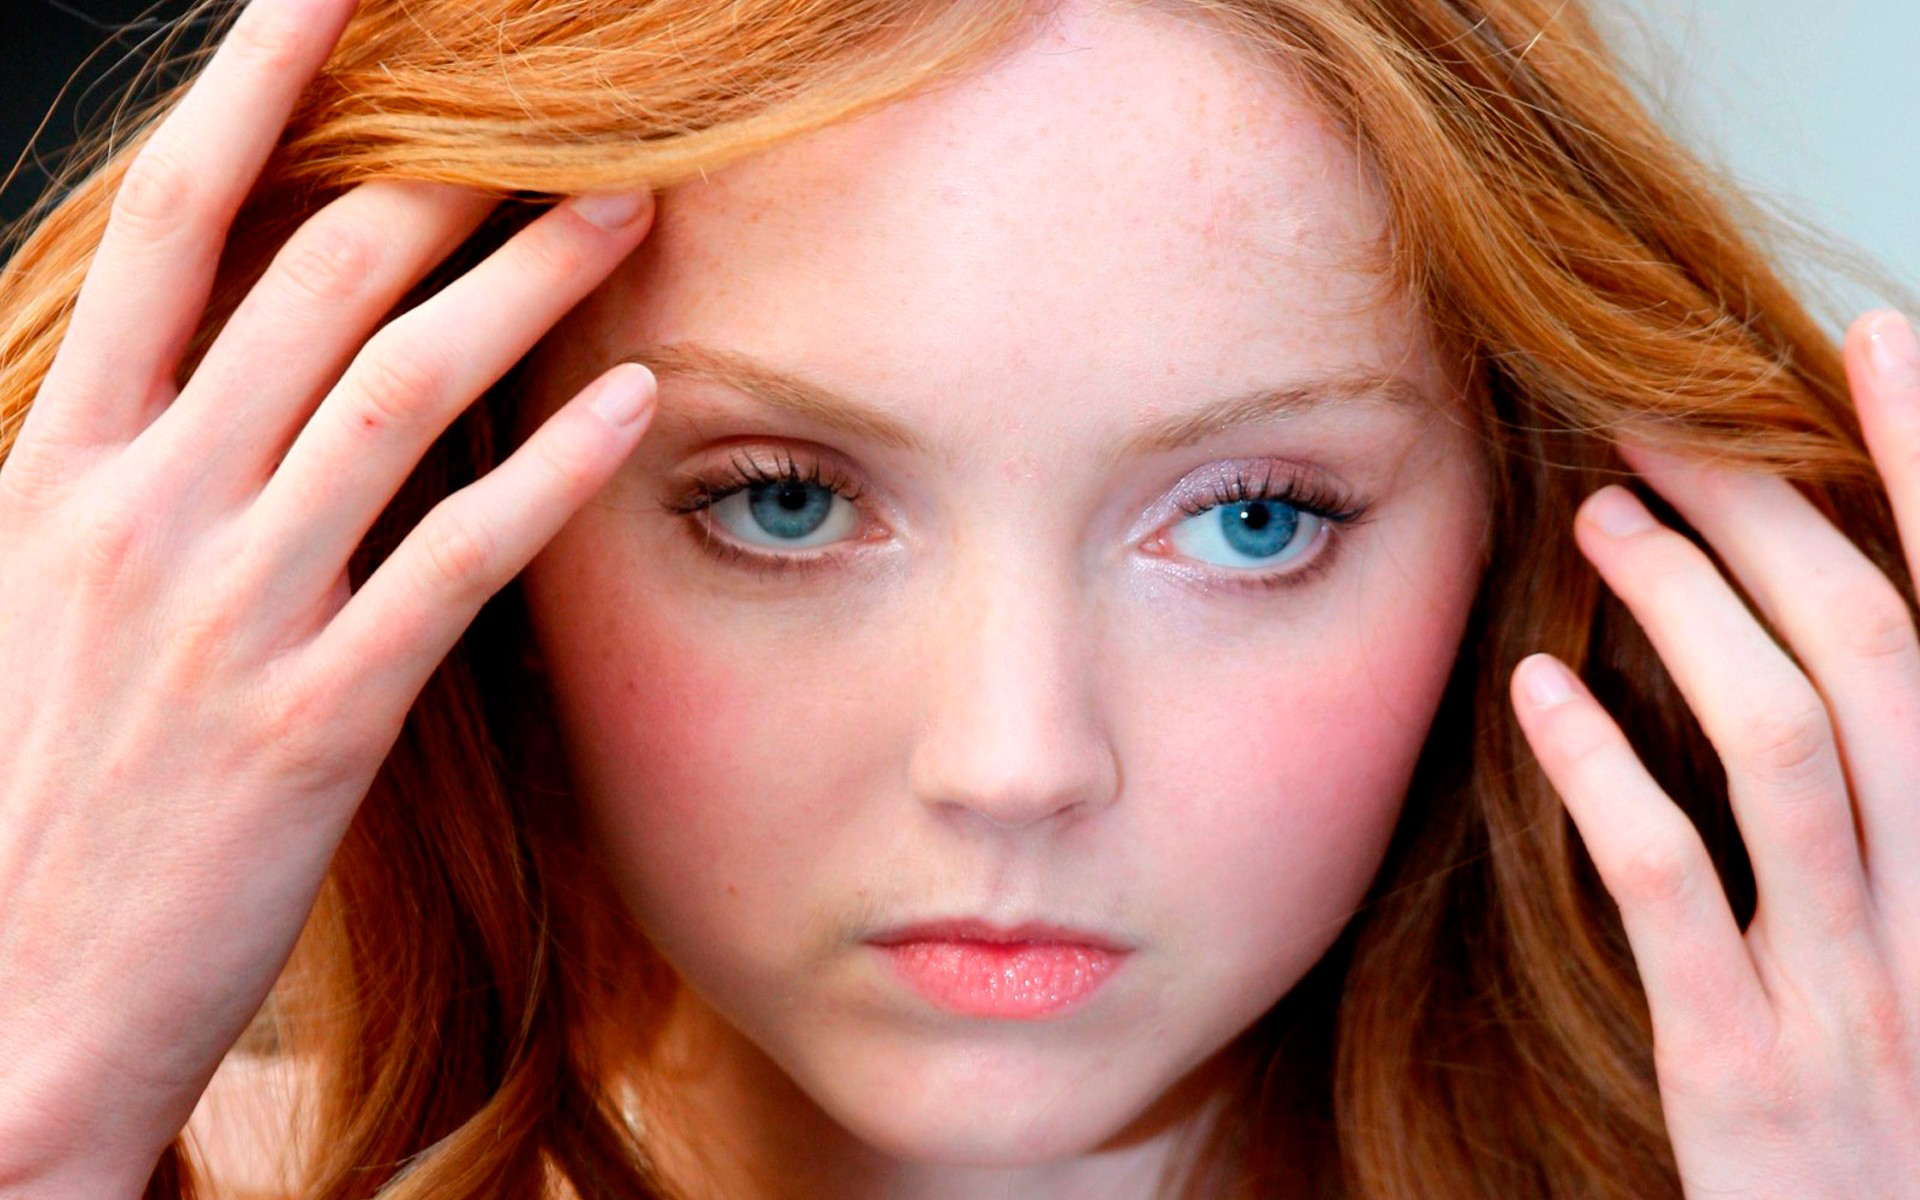 Lily Cole Wallpapers, Pictures, Images